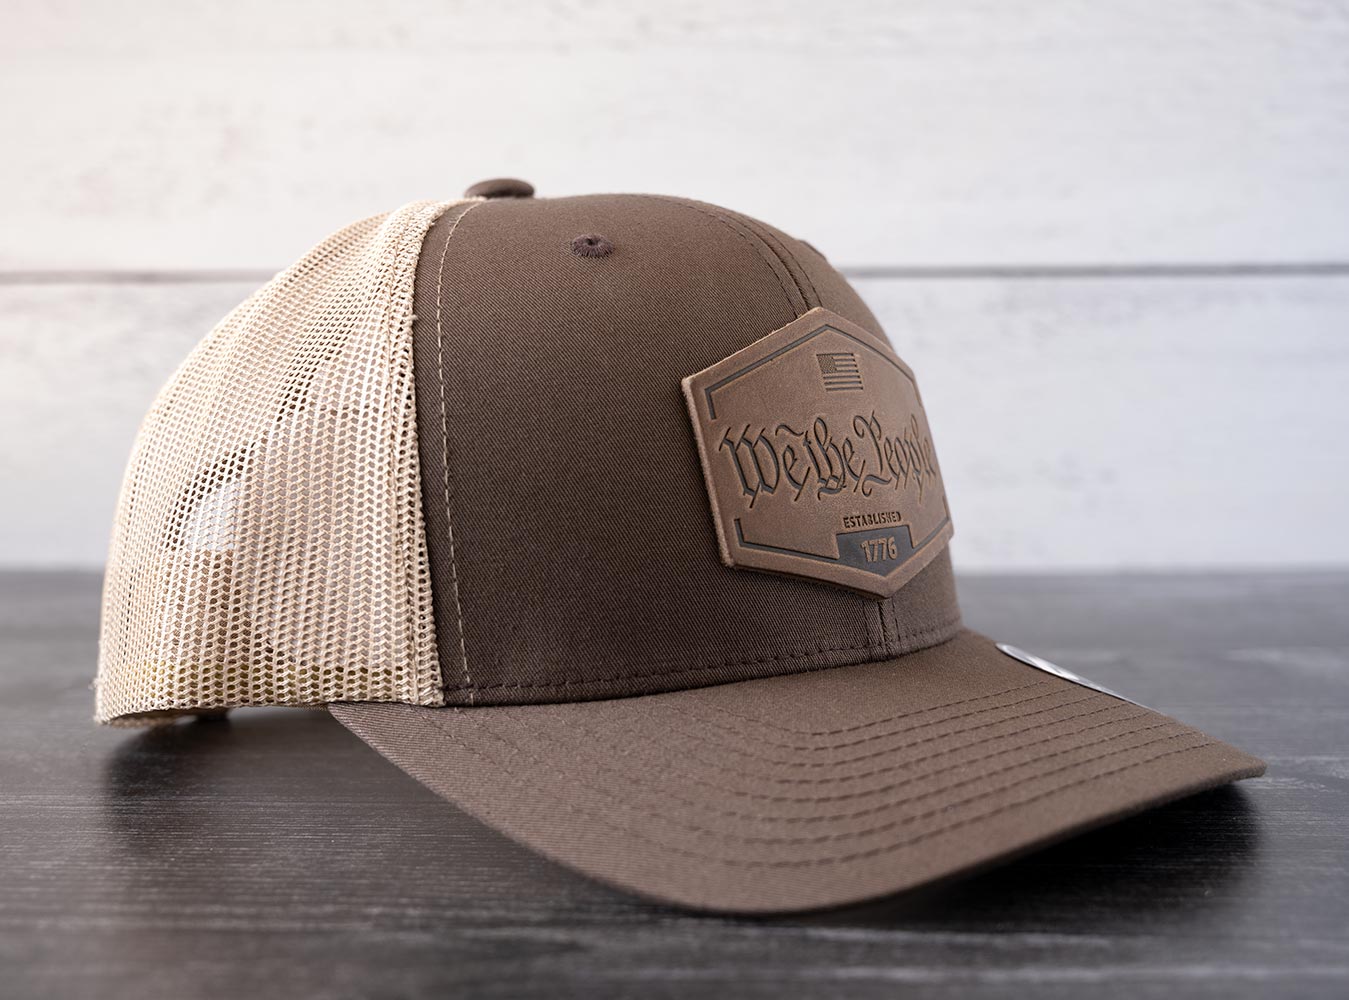 Left Angled View of the RANGE Leather We the People Hat in the Color Brown & Khaki